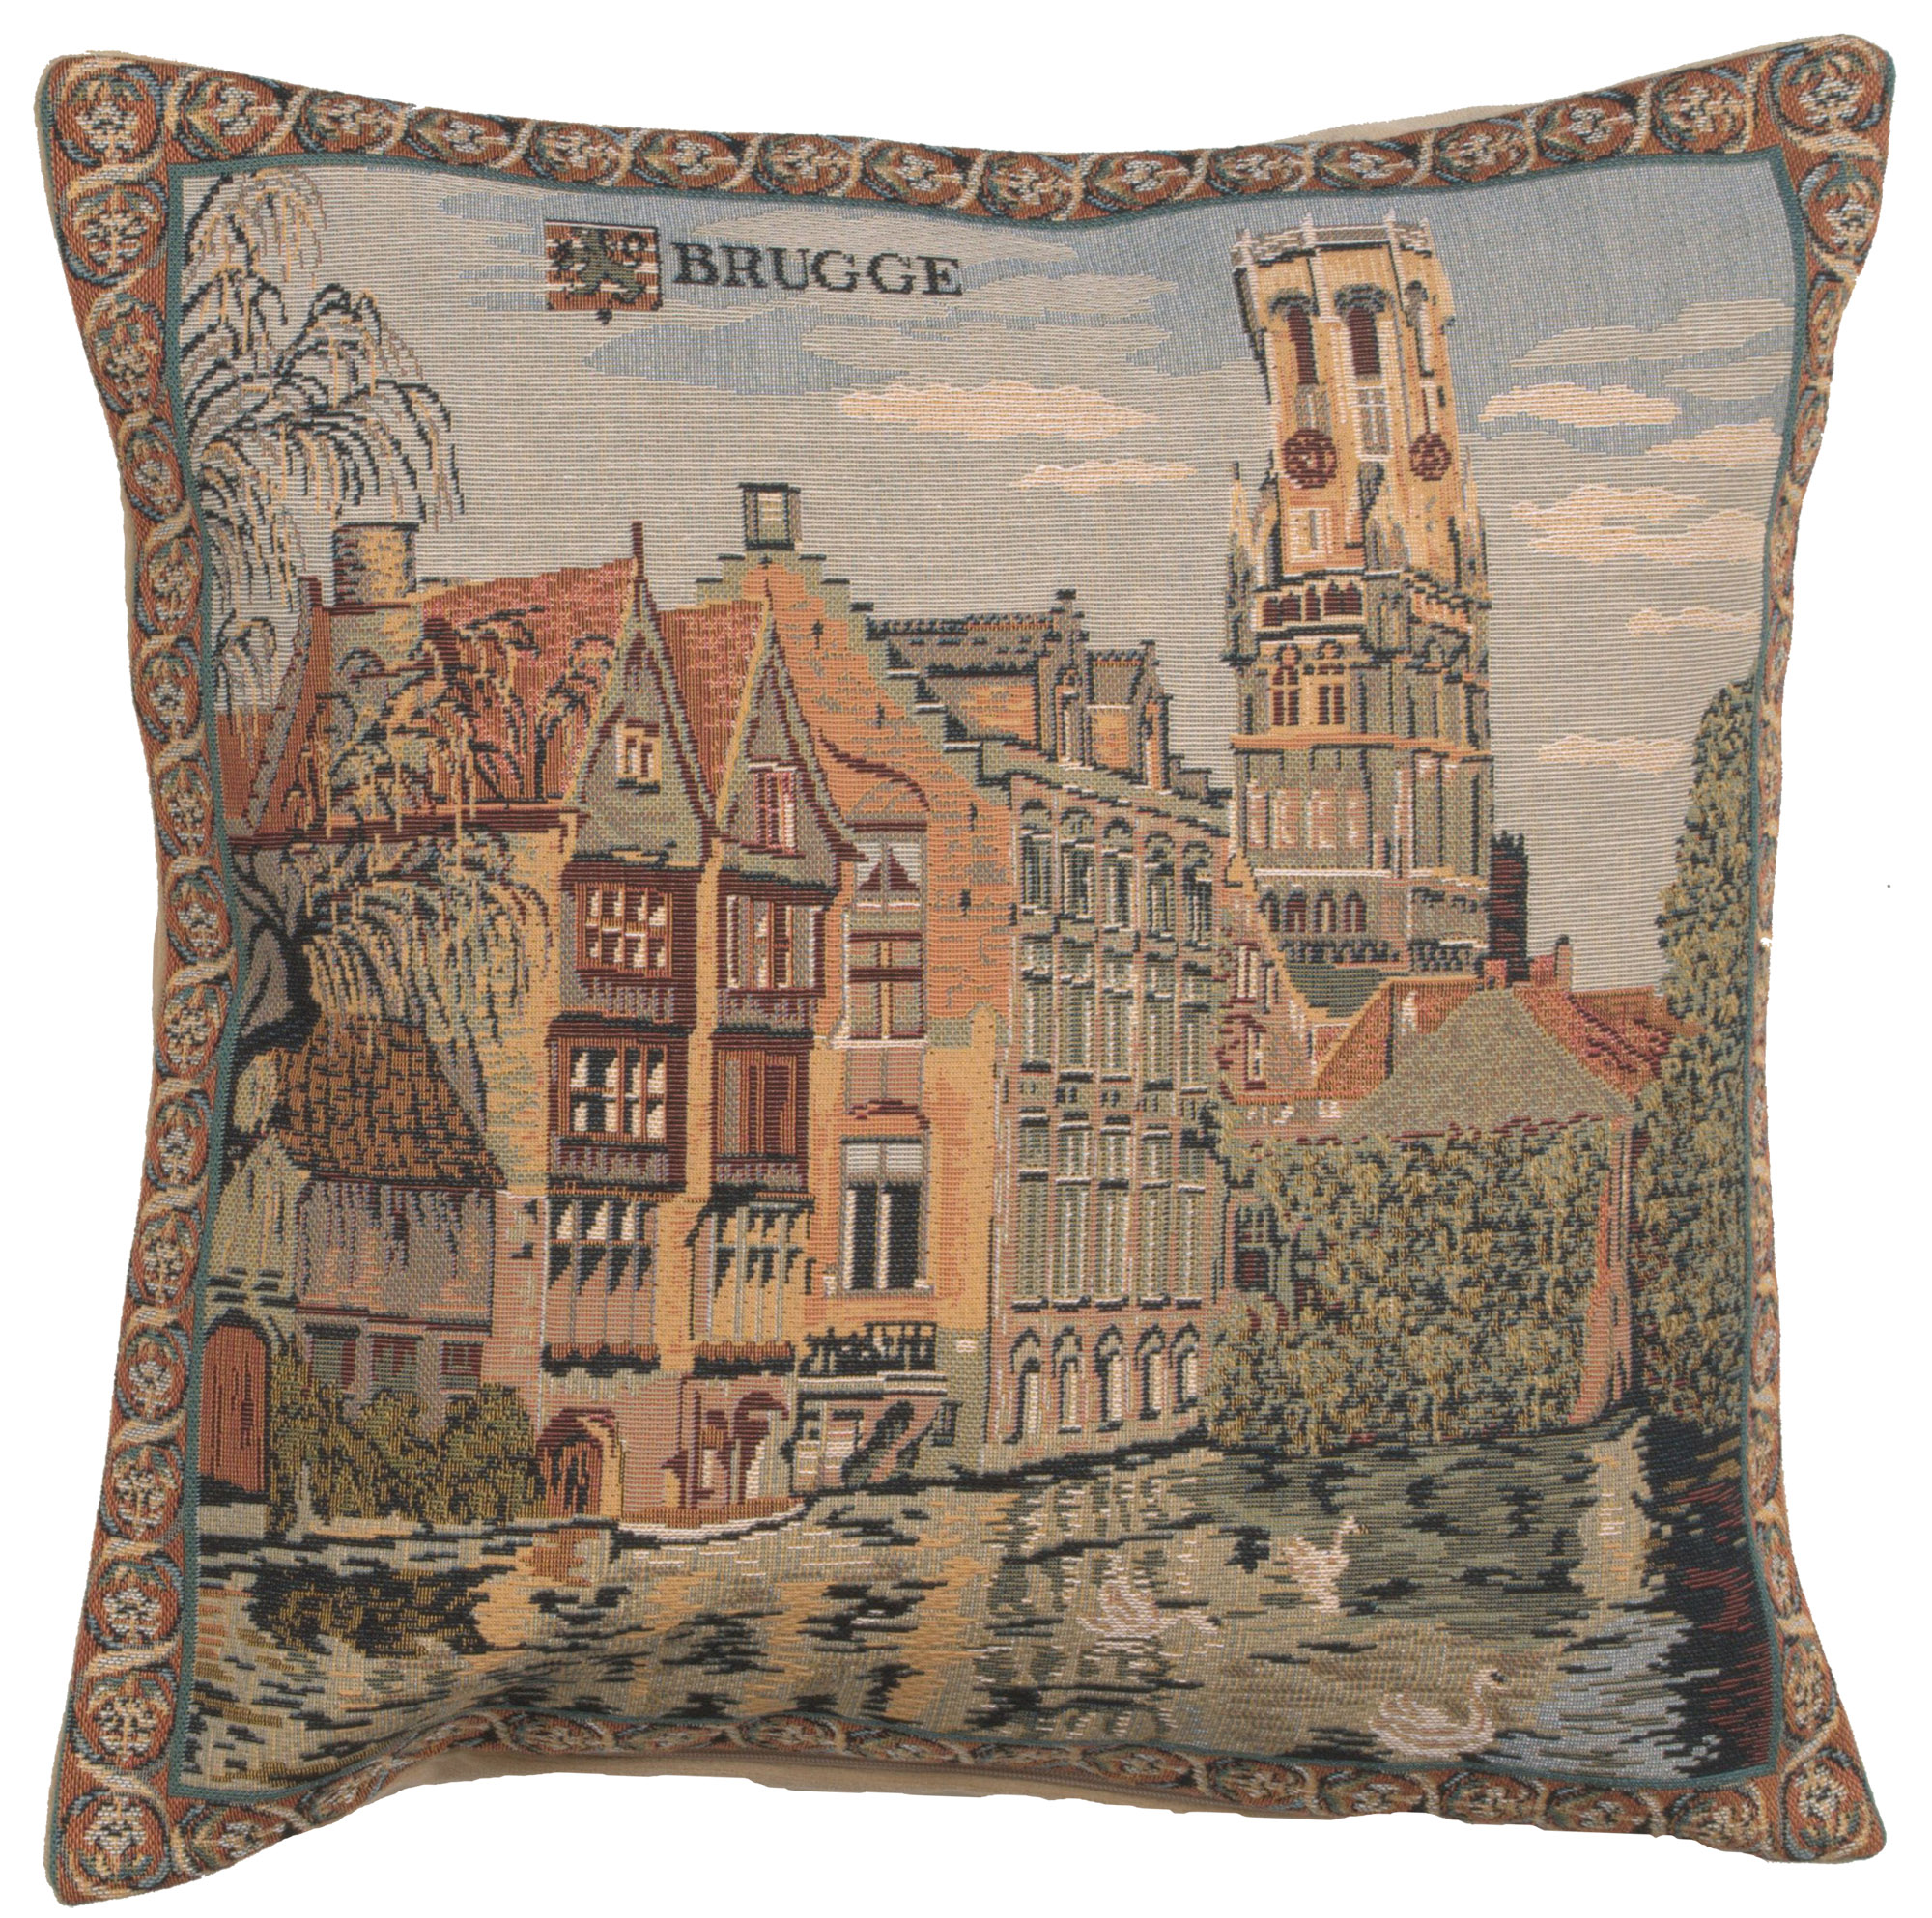 The Canals of Bruges Decorative Cushion Cover Throw Pillow Case 18x18 in Cotton